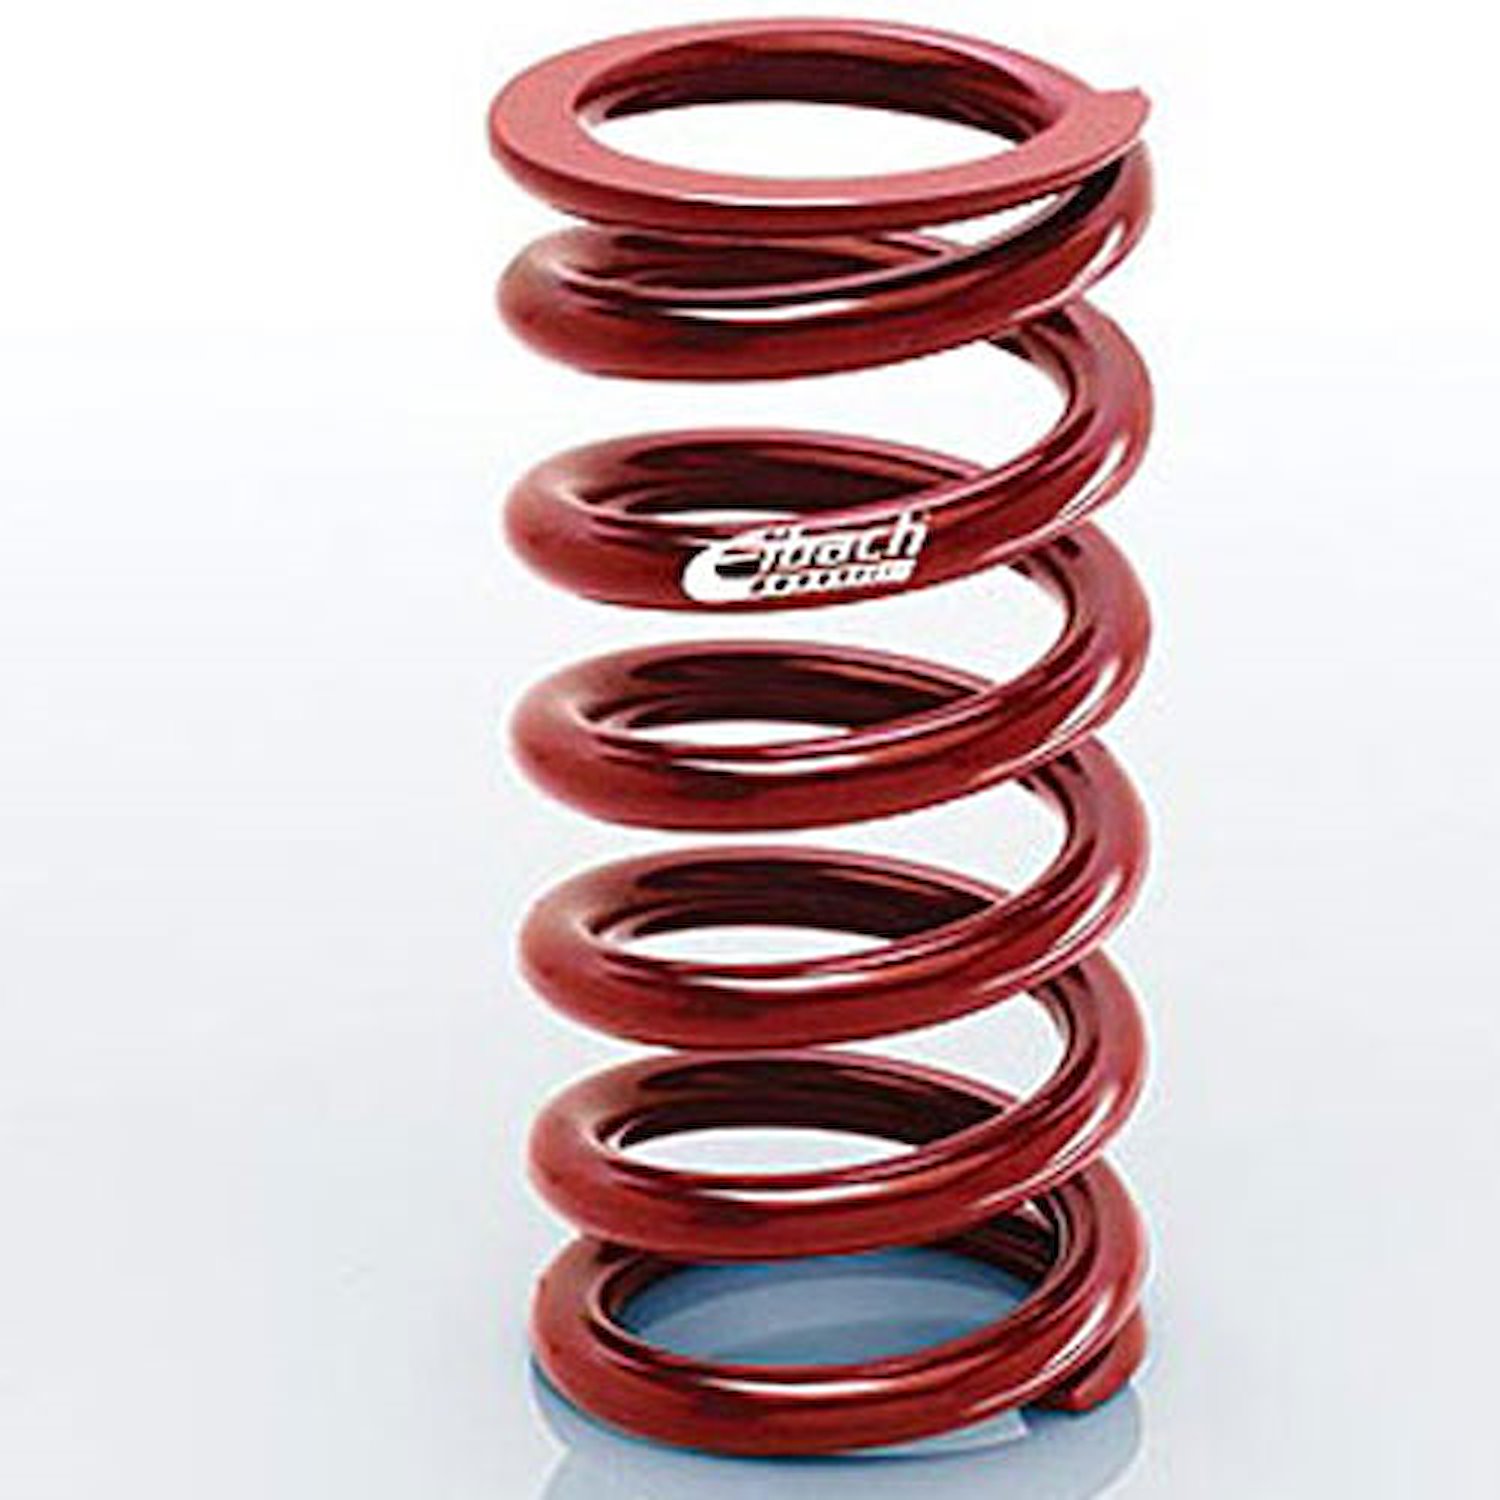 0950.500.0700 EIBACH CONVENTIONAL FRONT SPRING